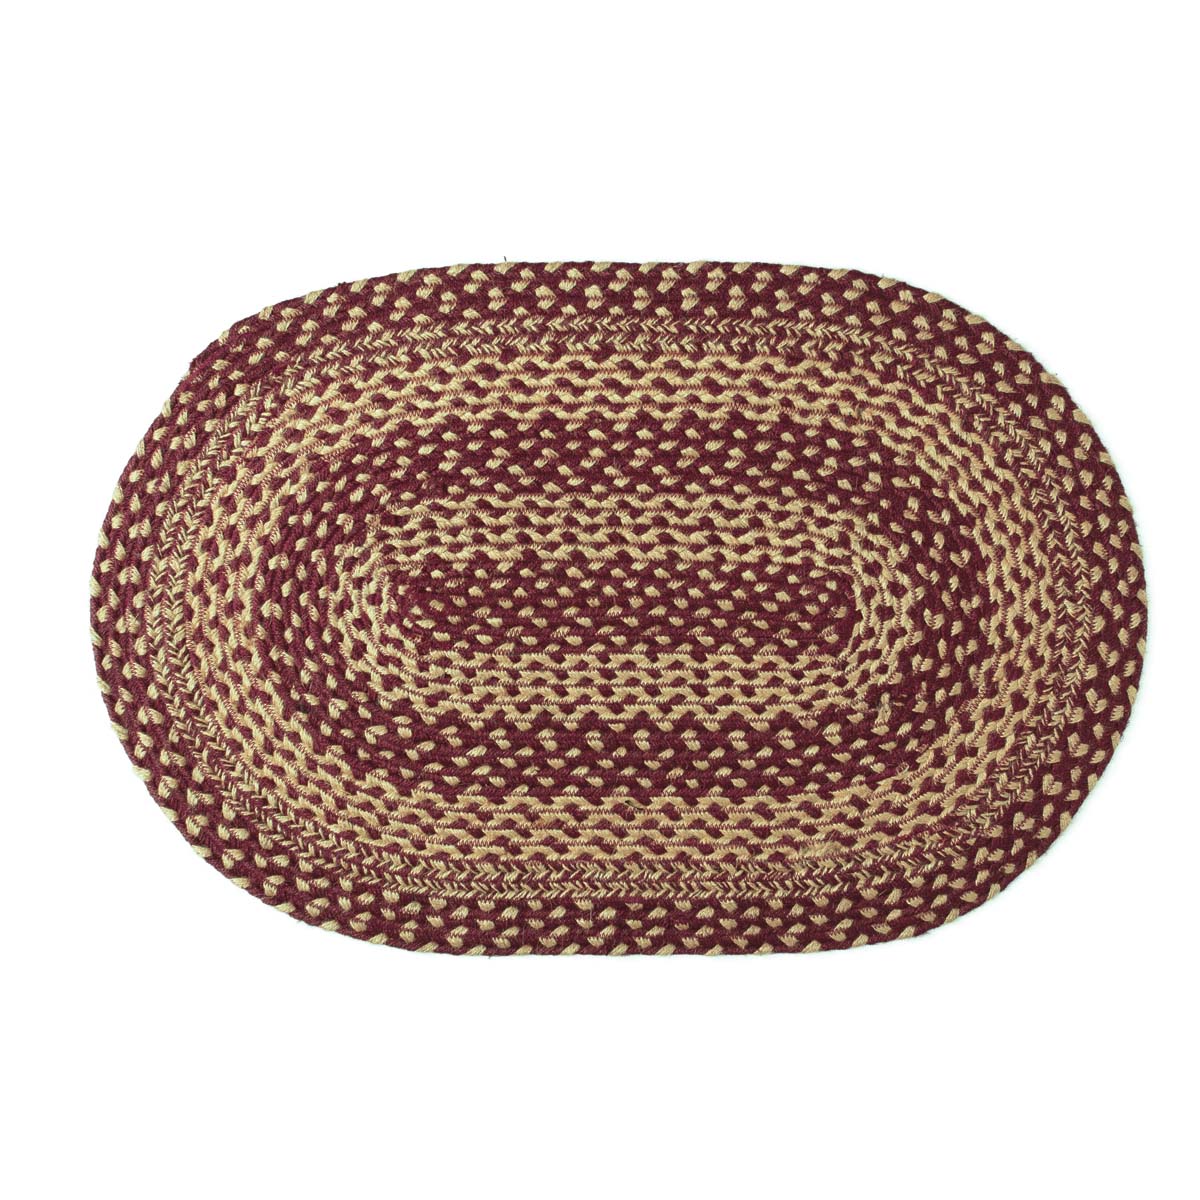 Burgundy Tan Jute Braided Rug Oval 20"x30" with Rug Pad VHC Brands